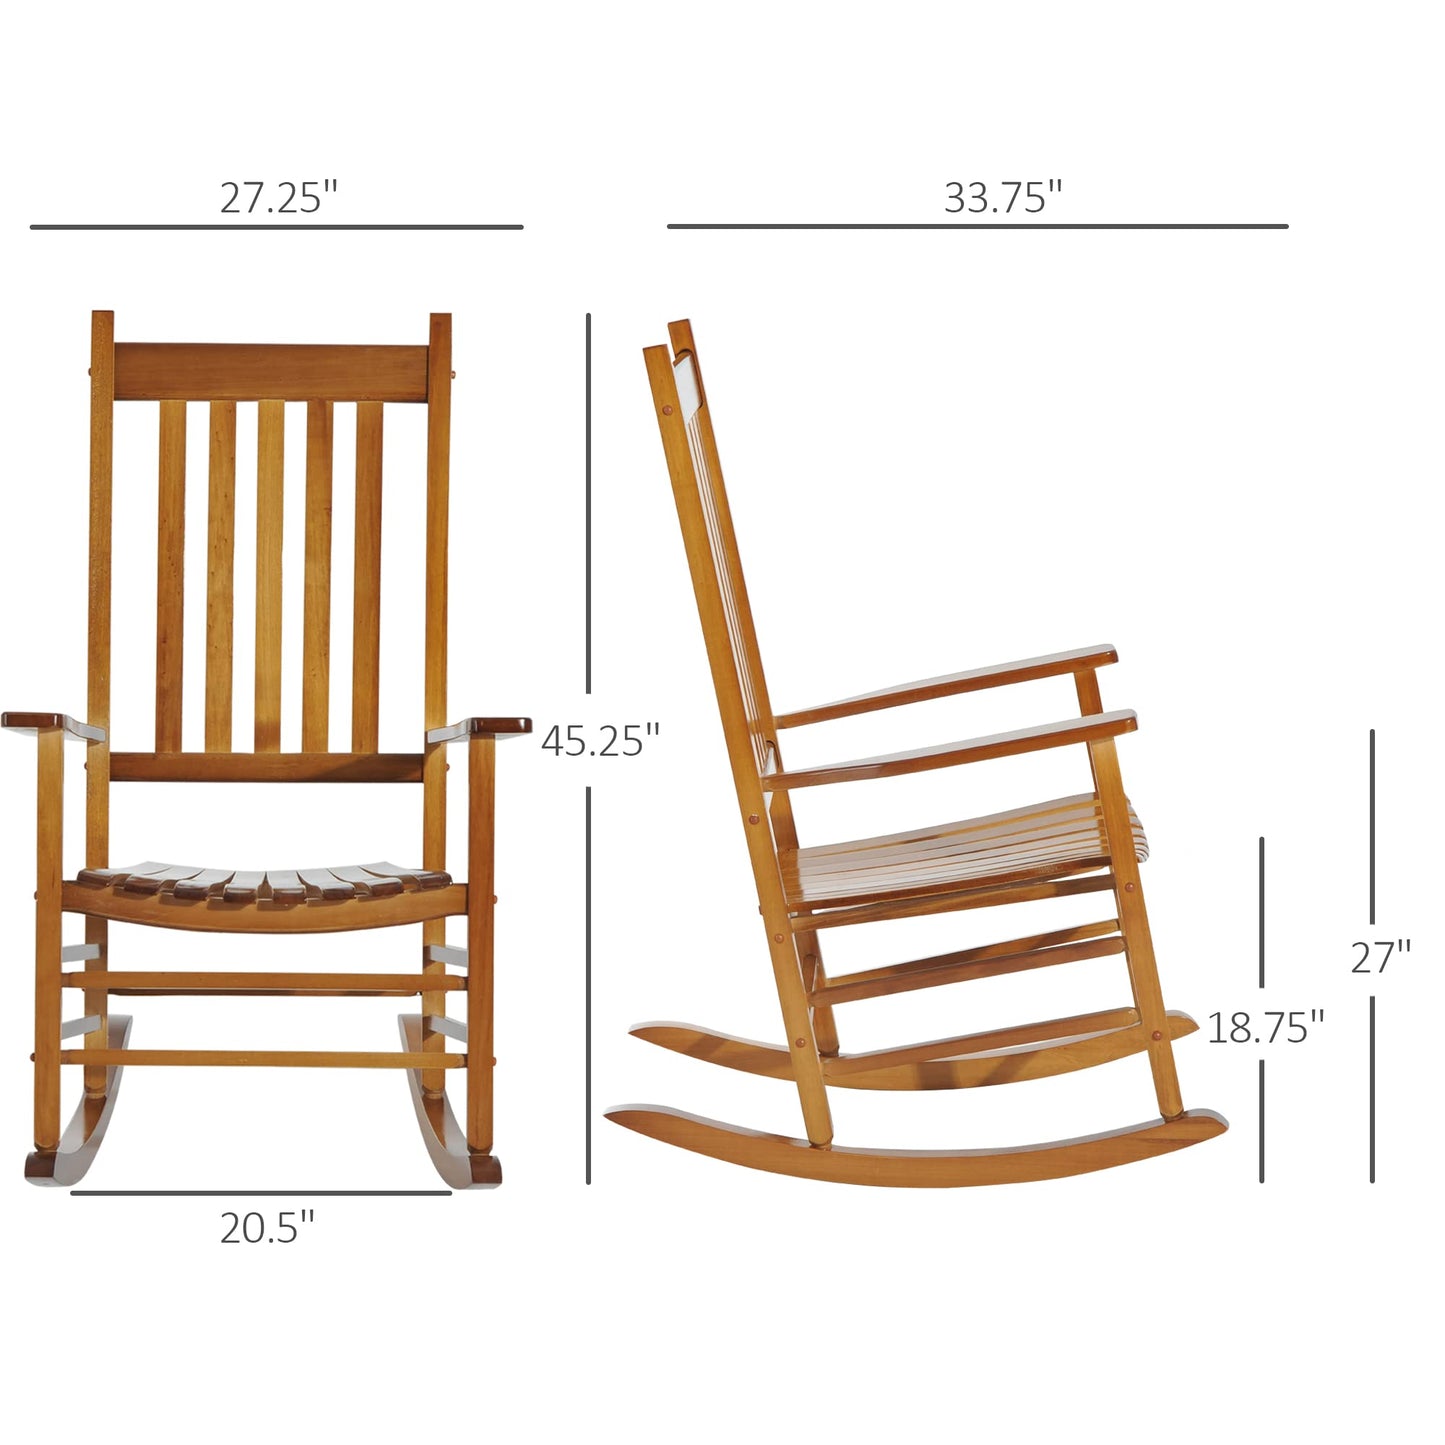 Outsunny Outdoor Rocking Chair, Patio Wooden Rocking Chair with Smooth Armrests, High Back for Garden, Balcony, Porch, Supports Up to 352 lbs., Natural